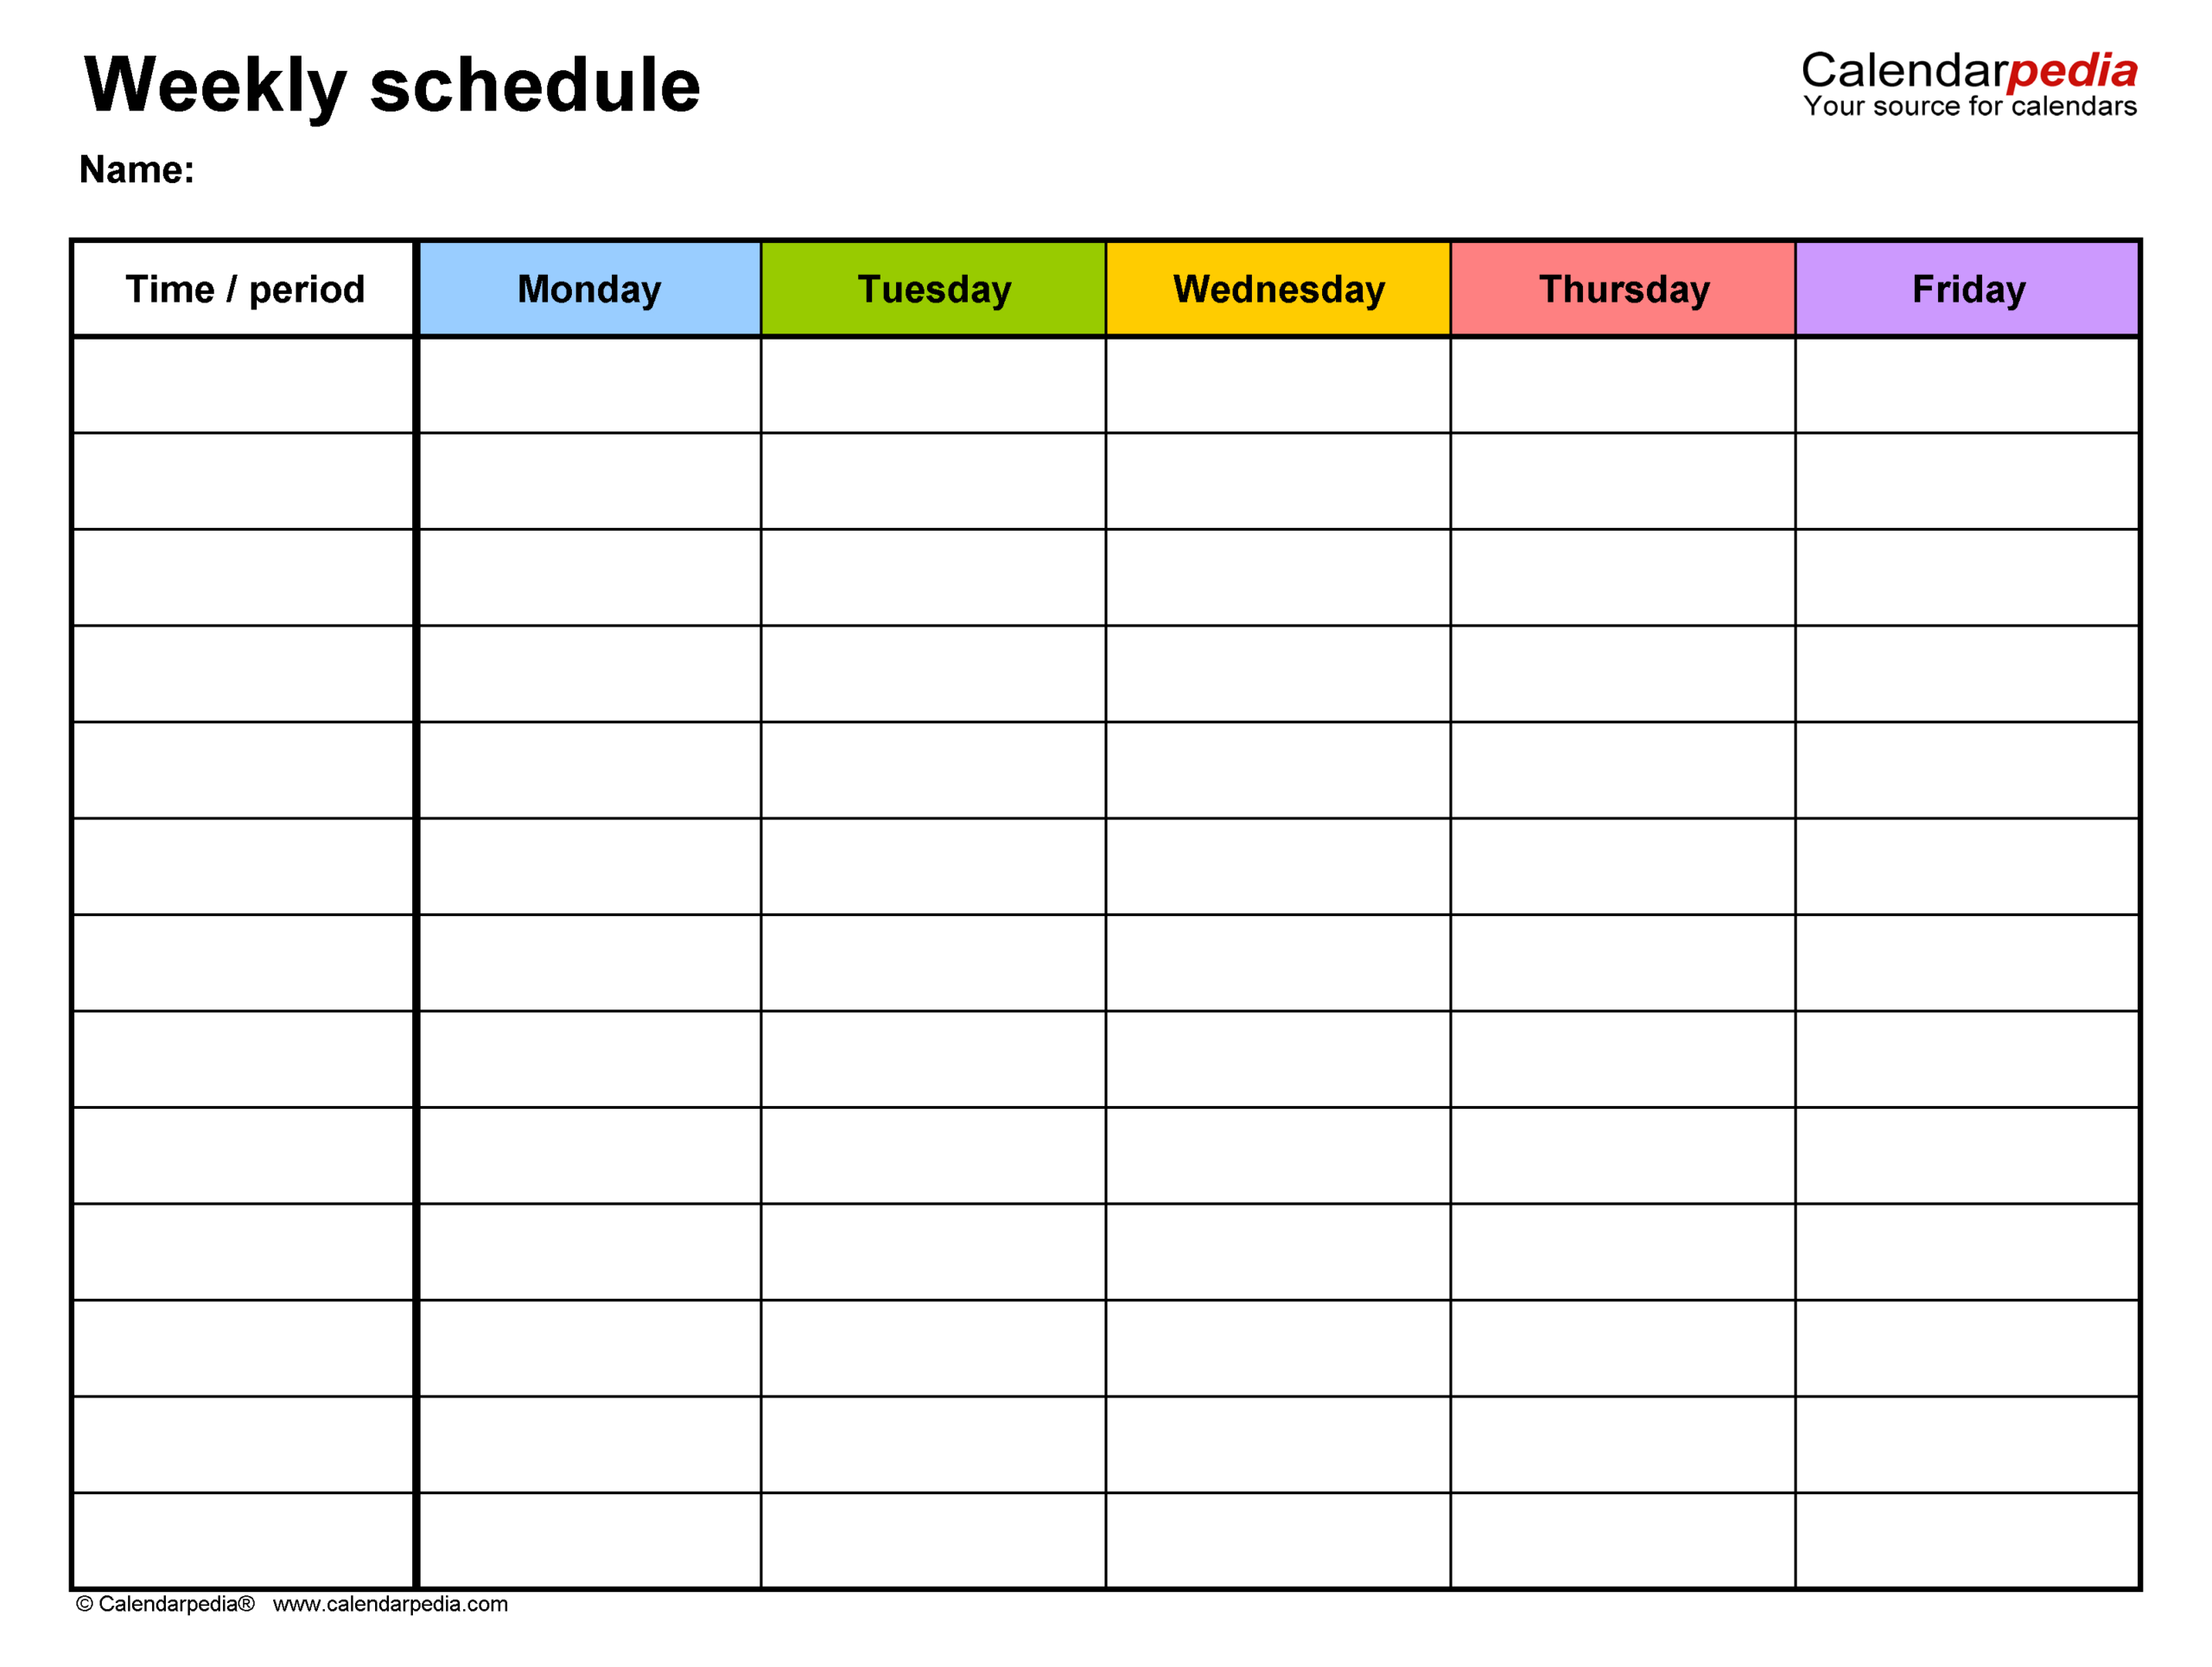 Free Weekly Schedules For Excel 18 Templates